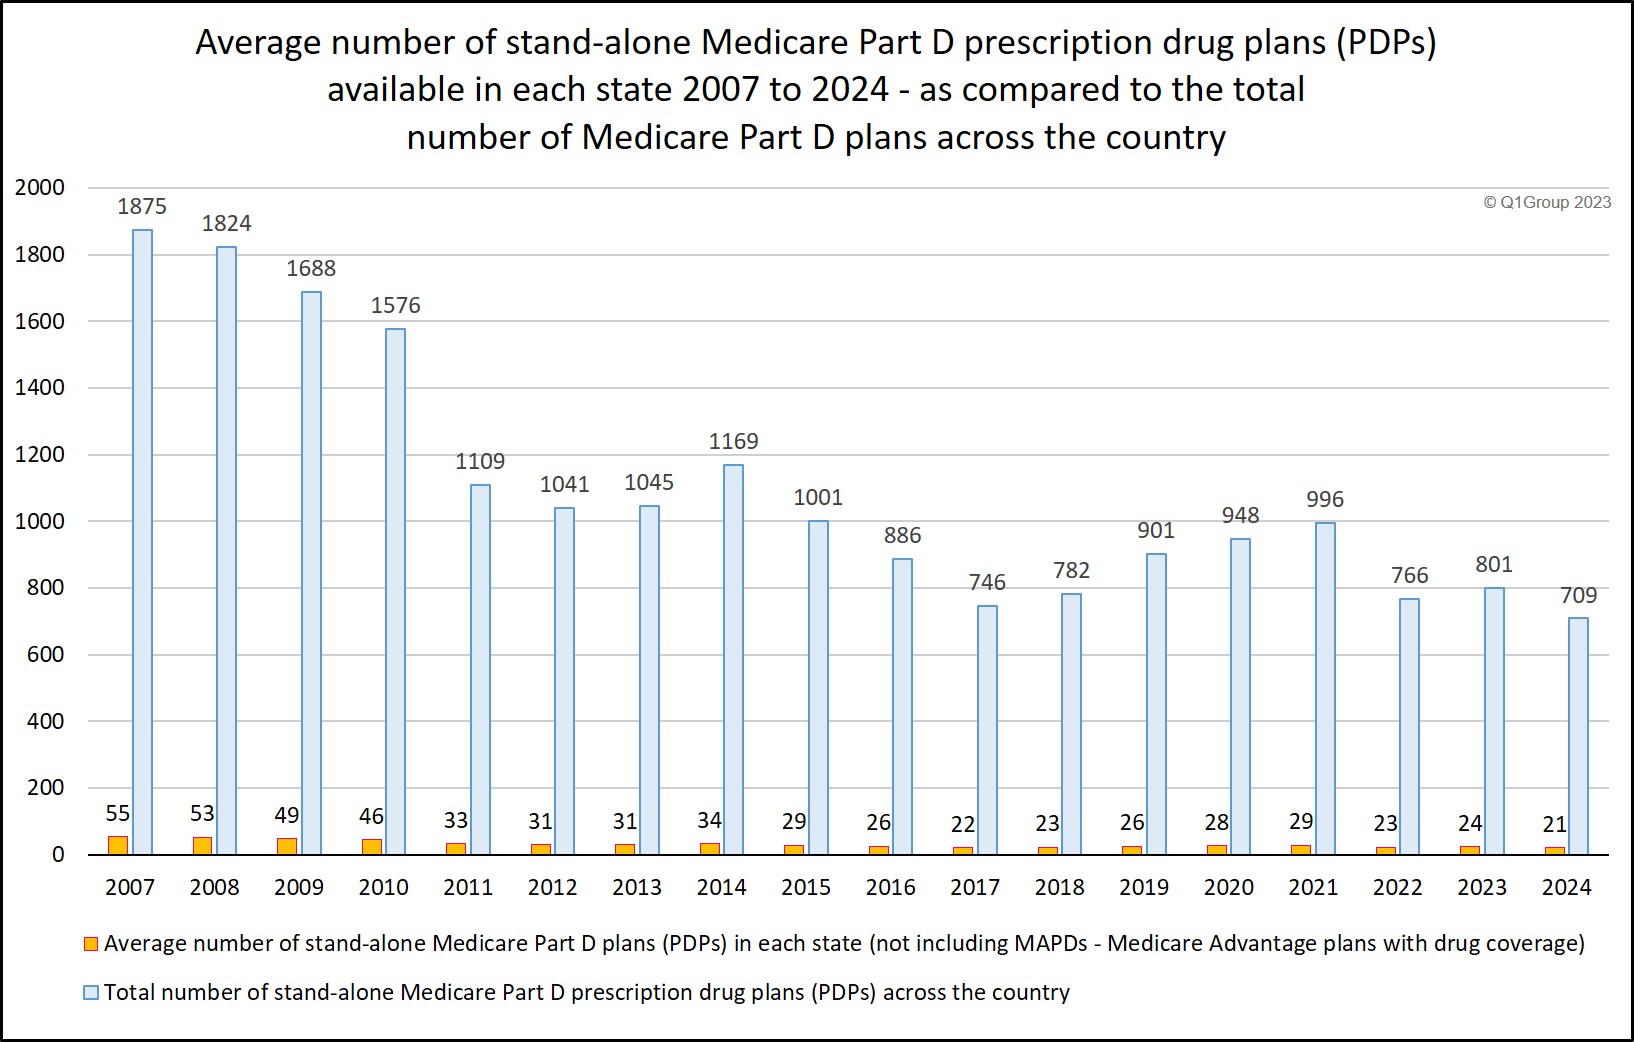 Average number of Medicare Part D plans 2007 to 2024 as compared to the total number of PDPs across the country